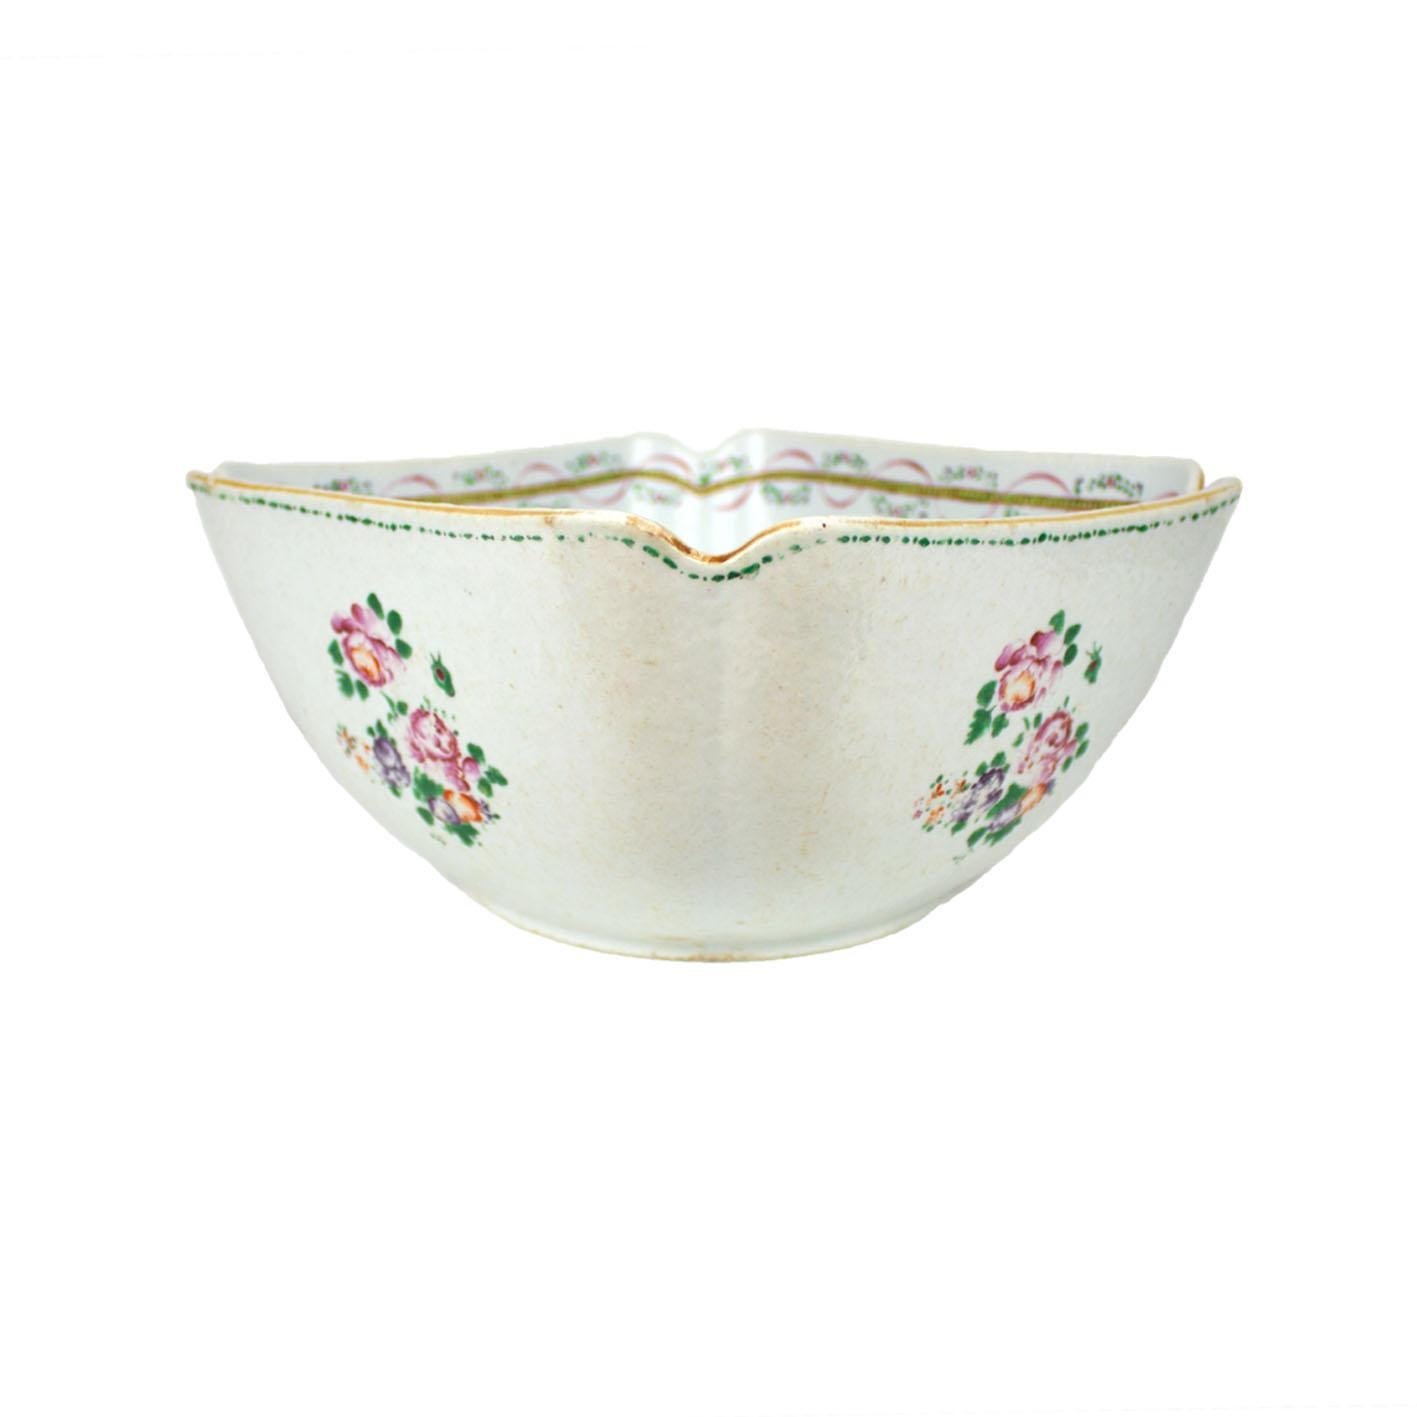 A Chinese porcelain square scalloped bowl with orange peel texture, East India Company, Qianlong Period (1736-1795). Polychrome Famille Rose decoration representing floral motifs. The inside frieze is decorated with ribbons and garlands of flowers.